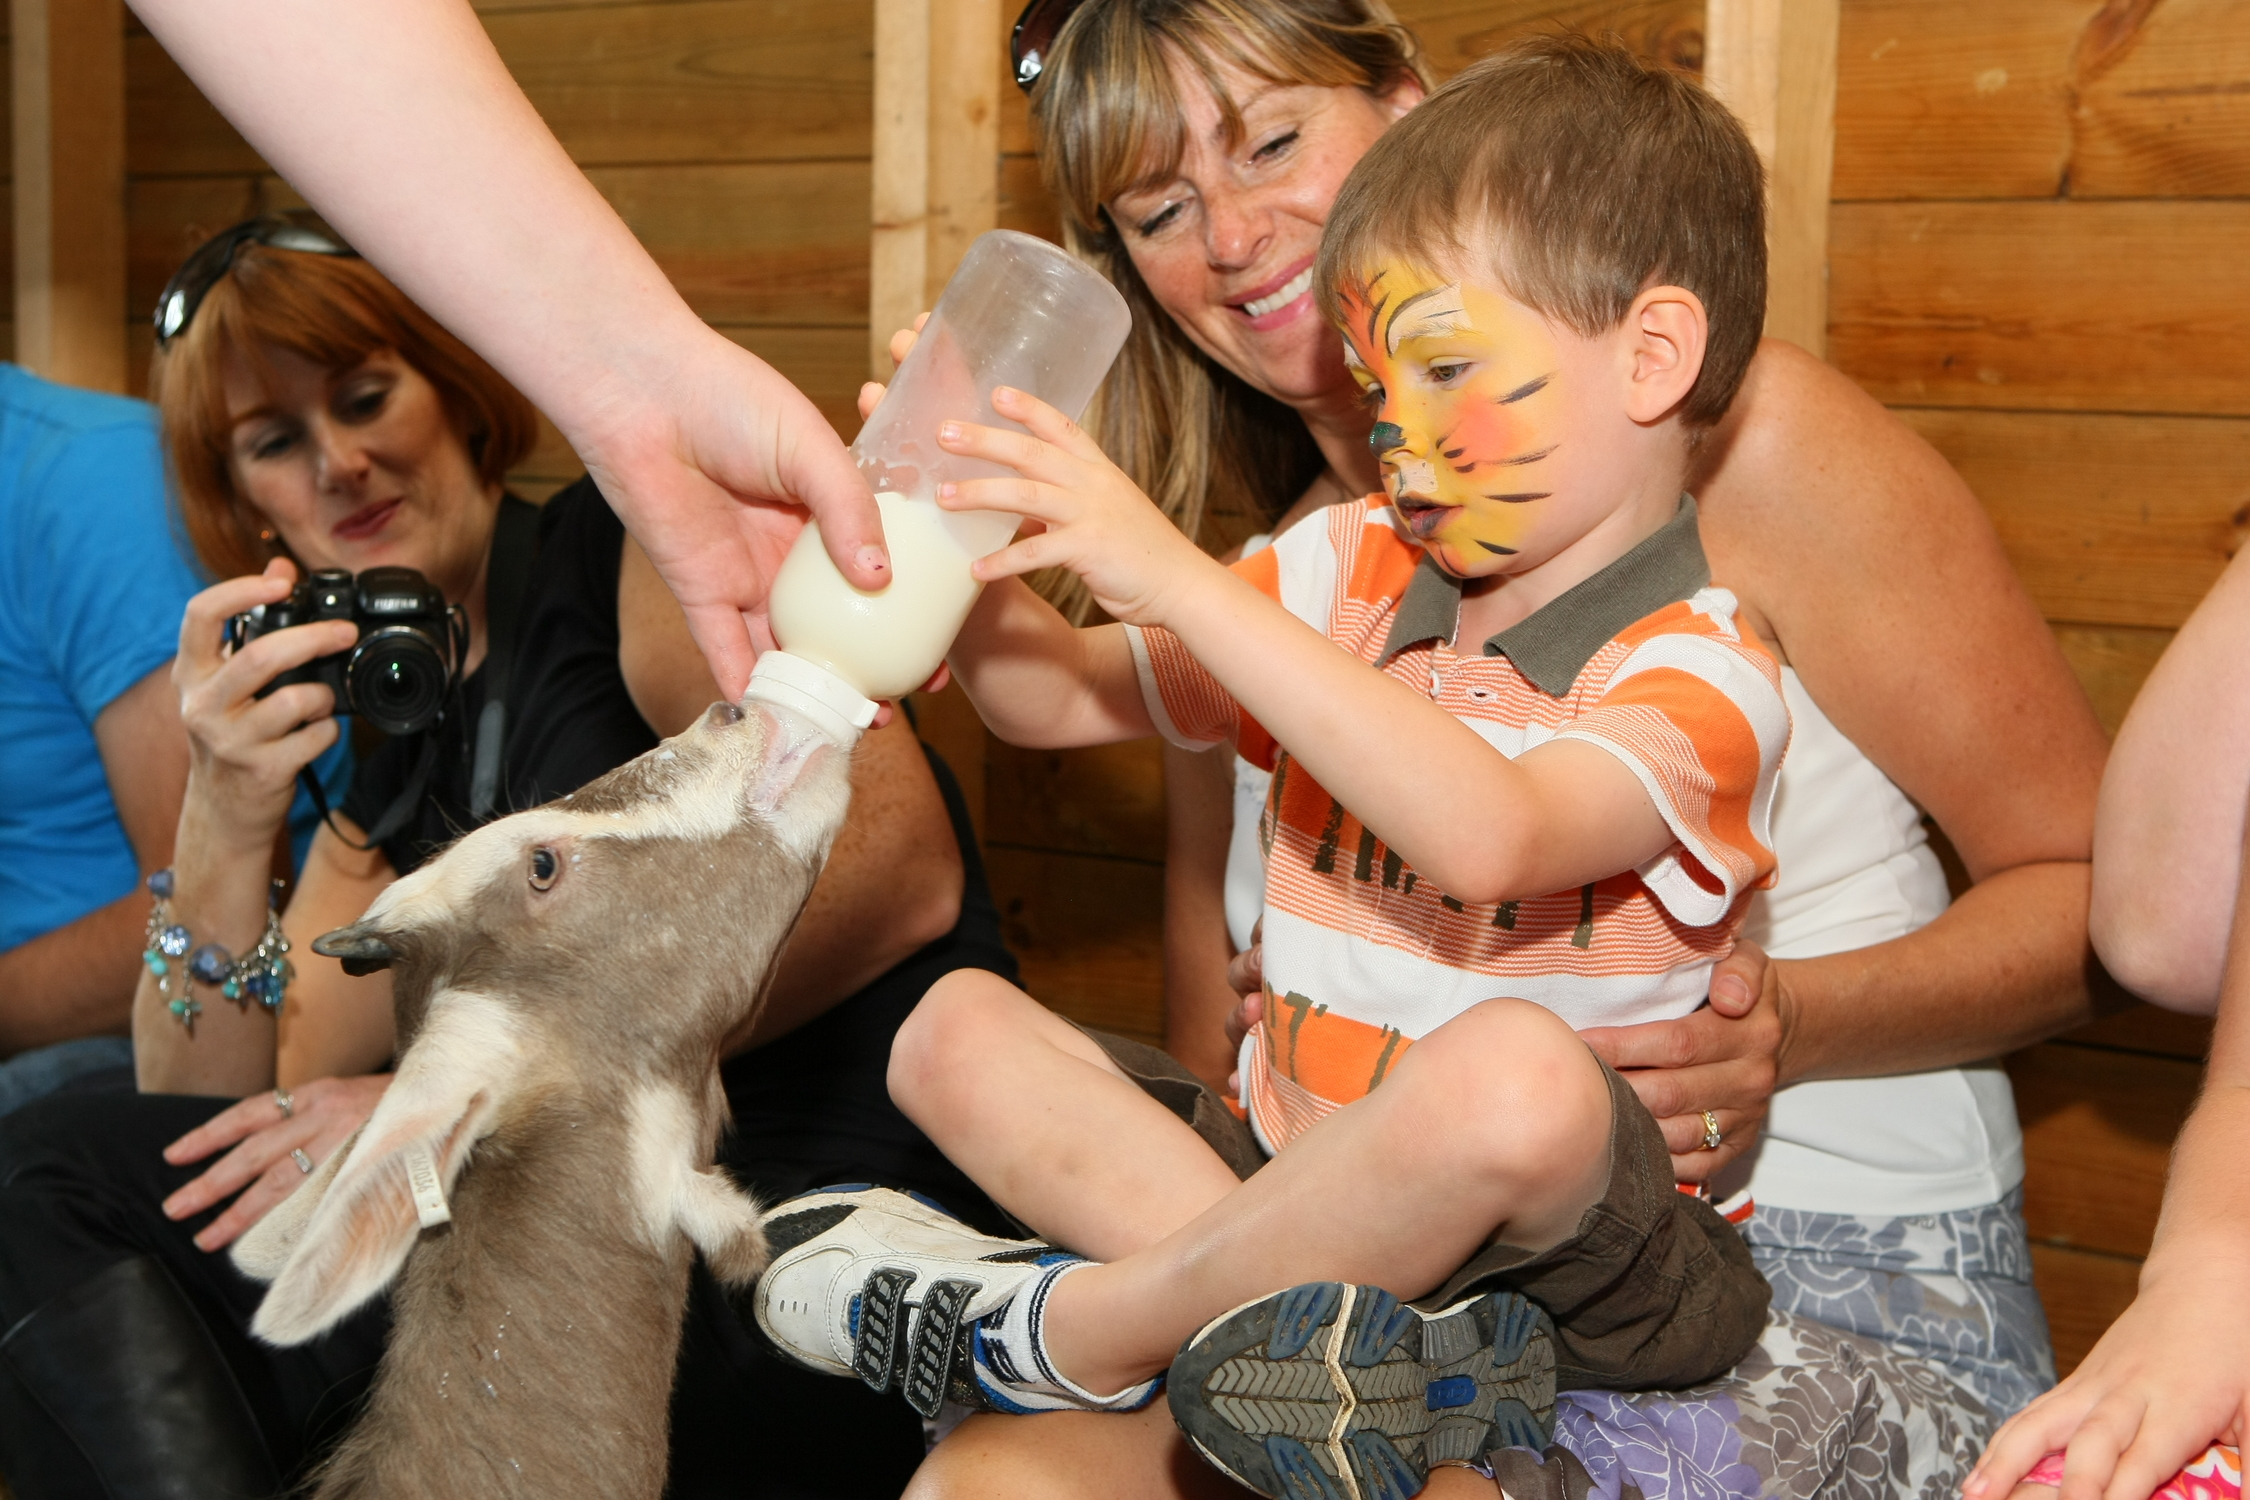 Dwf petting zoochild and goat with face paint.JPG